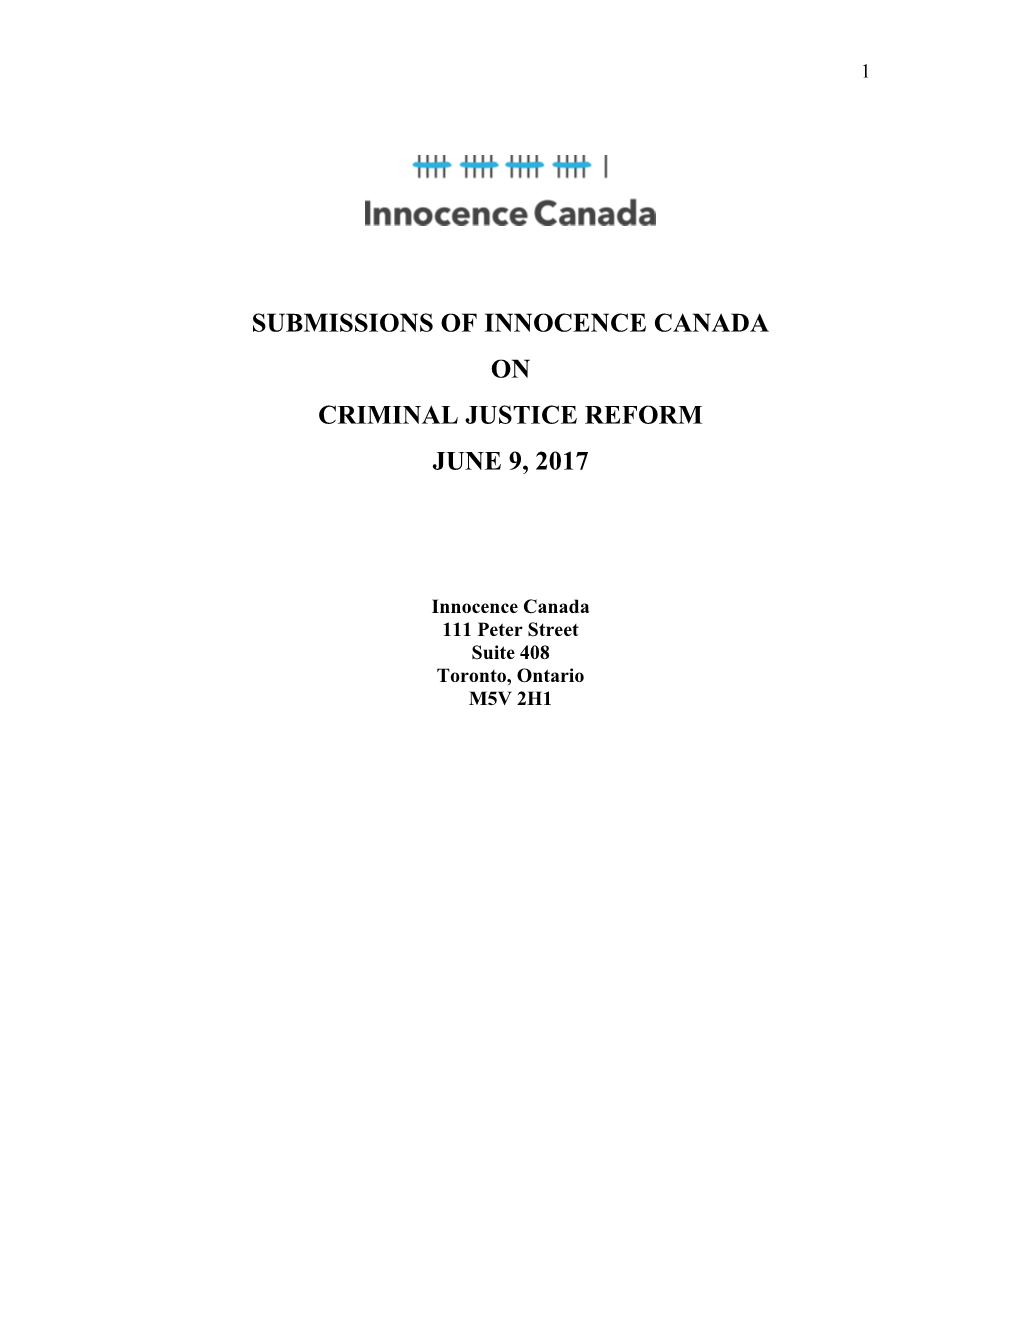 Submissions of Innocence Canada on Criminal Justice Reform June 9, 2017